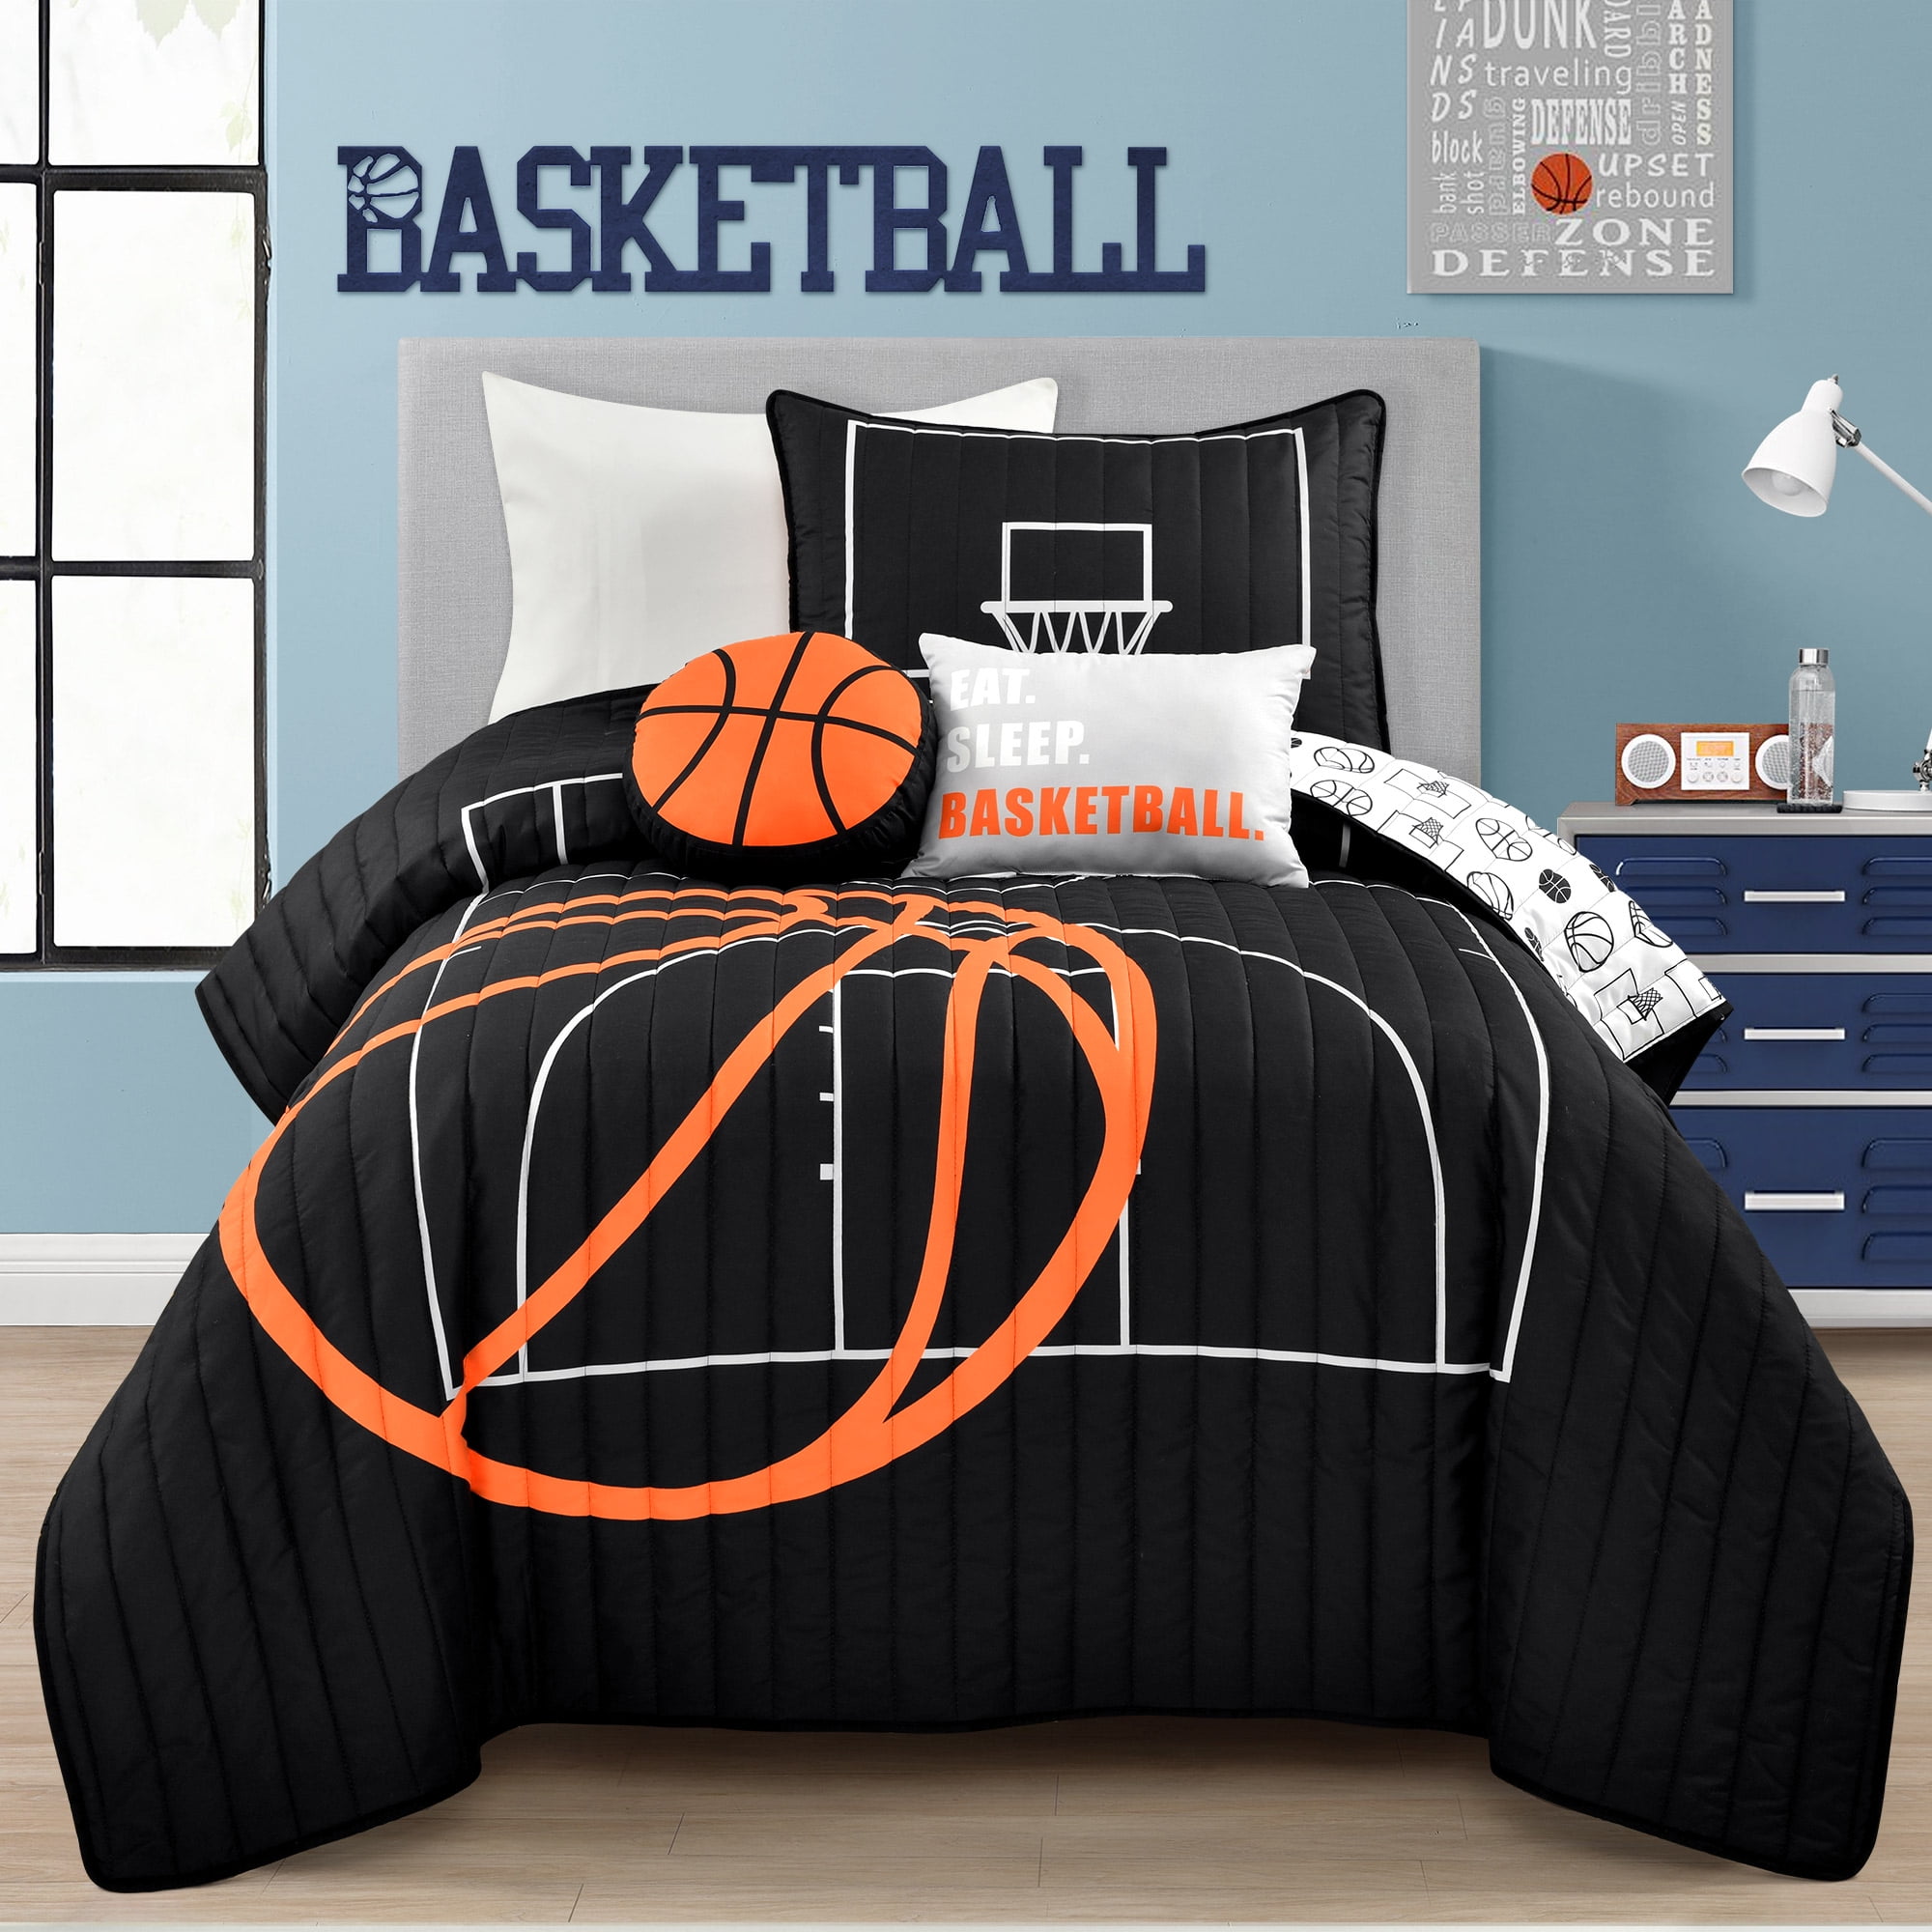 Junsey Colorful Watercolor Basketball Bedding Set Teens Boys Sports Duvet Cover Set Twin Size Bedroom Decor